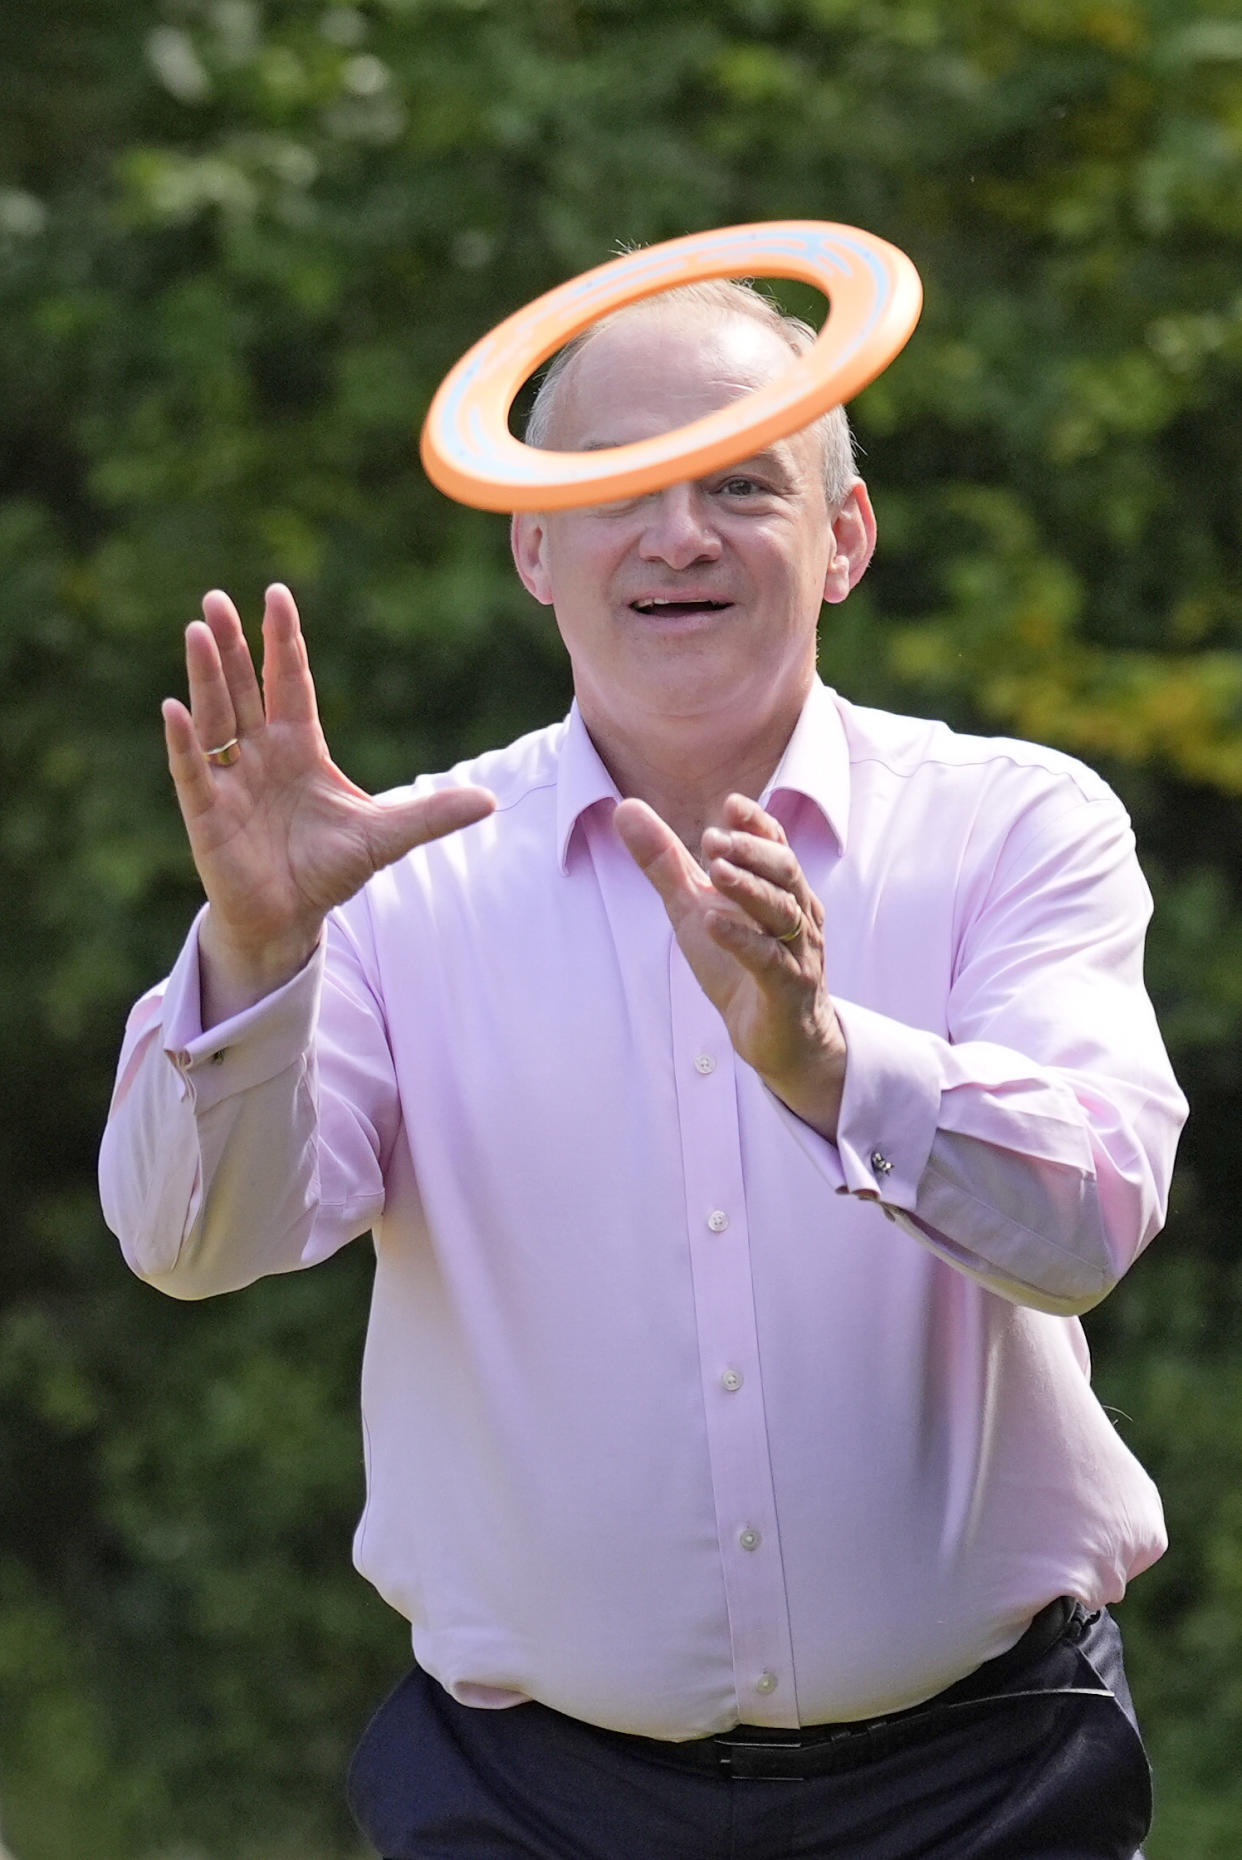 Lib Dem leader Sir Ed Davey upgrades his knighthood to a sainthood as he plays with a frisbee during a visit to Crowd Hill Farm, Hampshire (Andrew Matthews/PA)